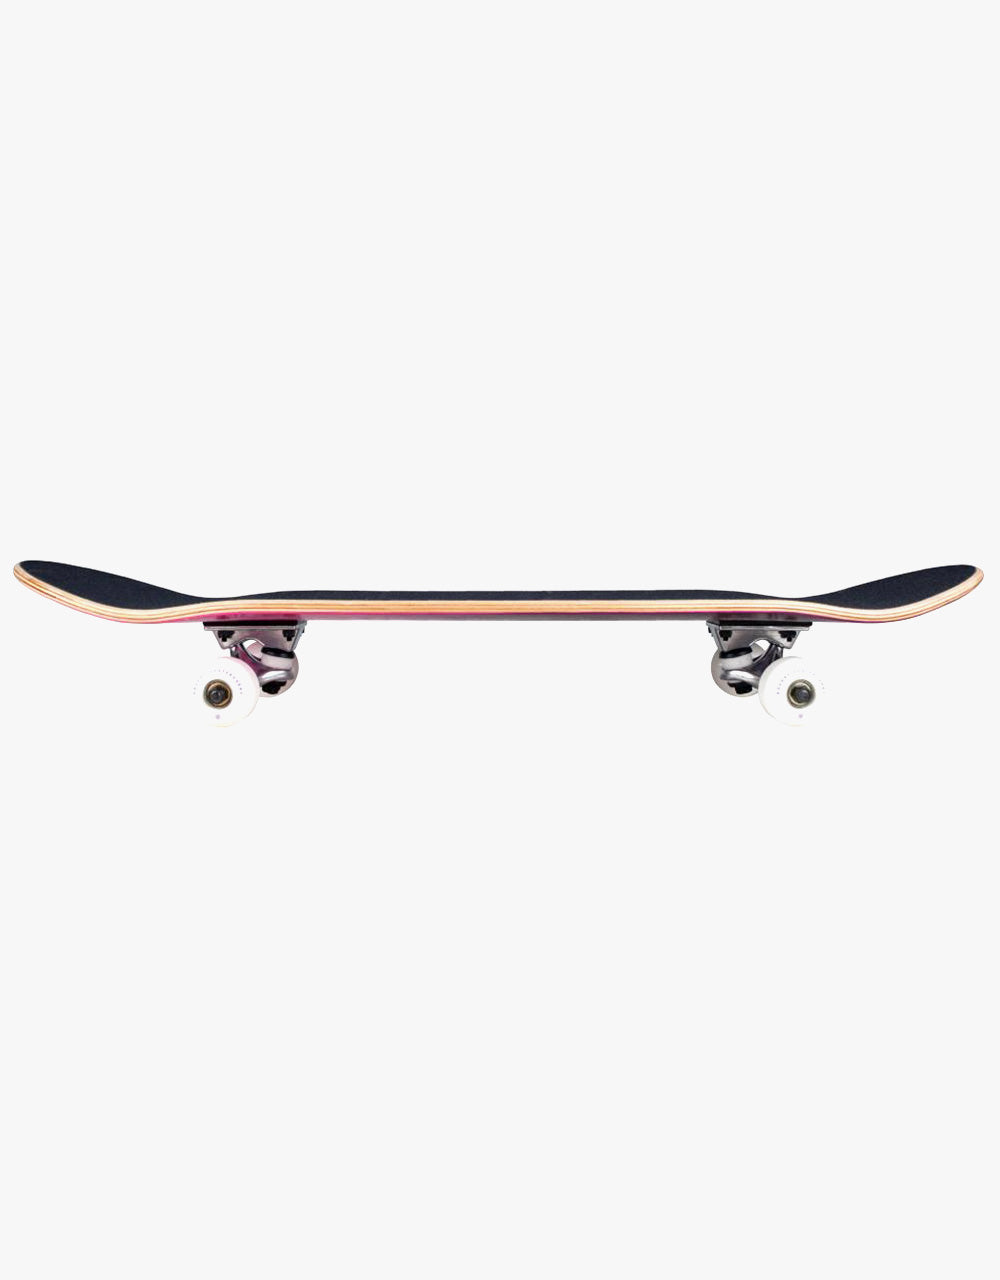 Rocket Double Dipped Complete Skateboard - 7.75"